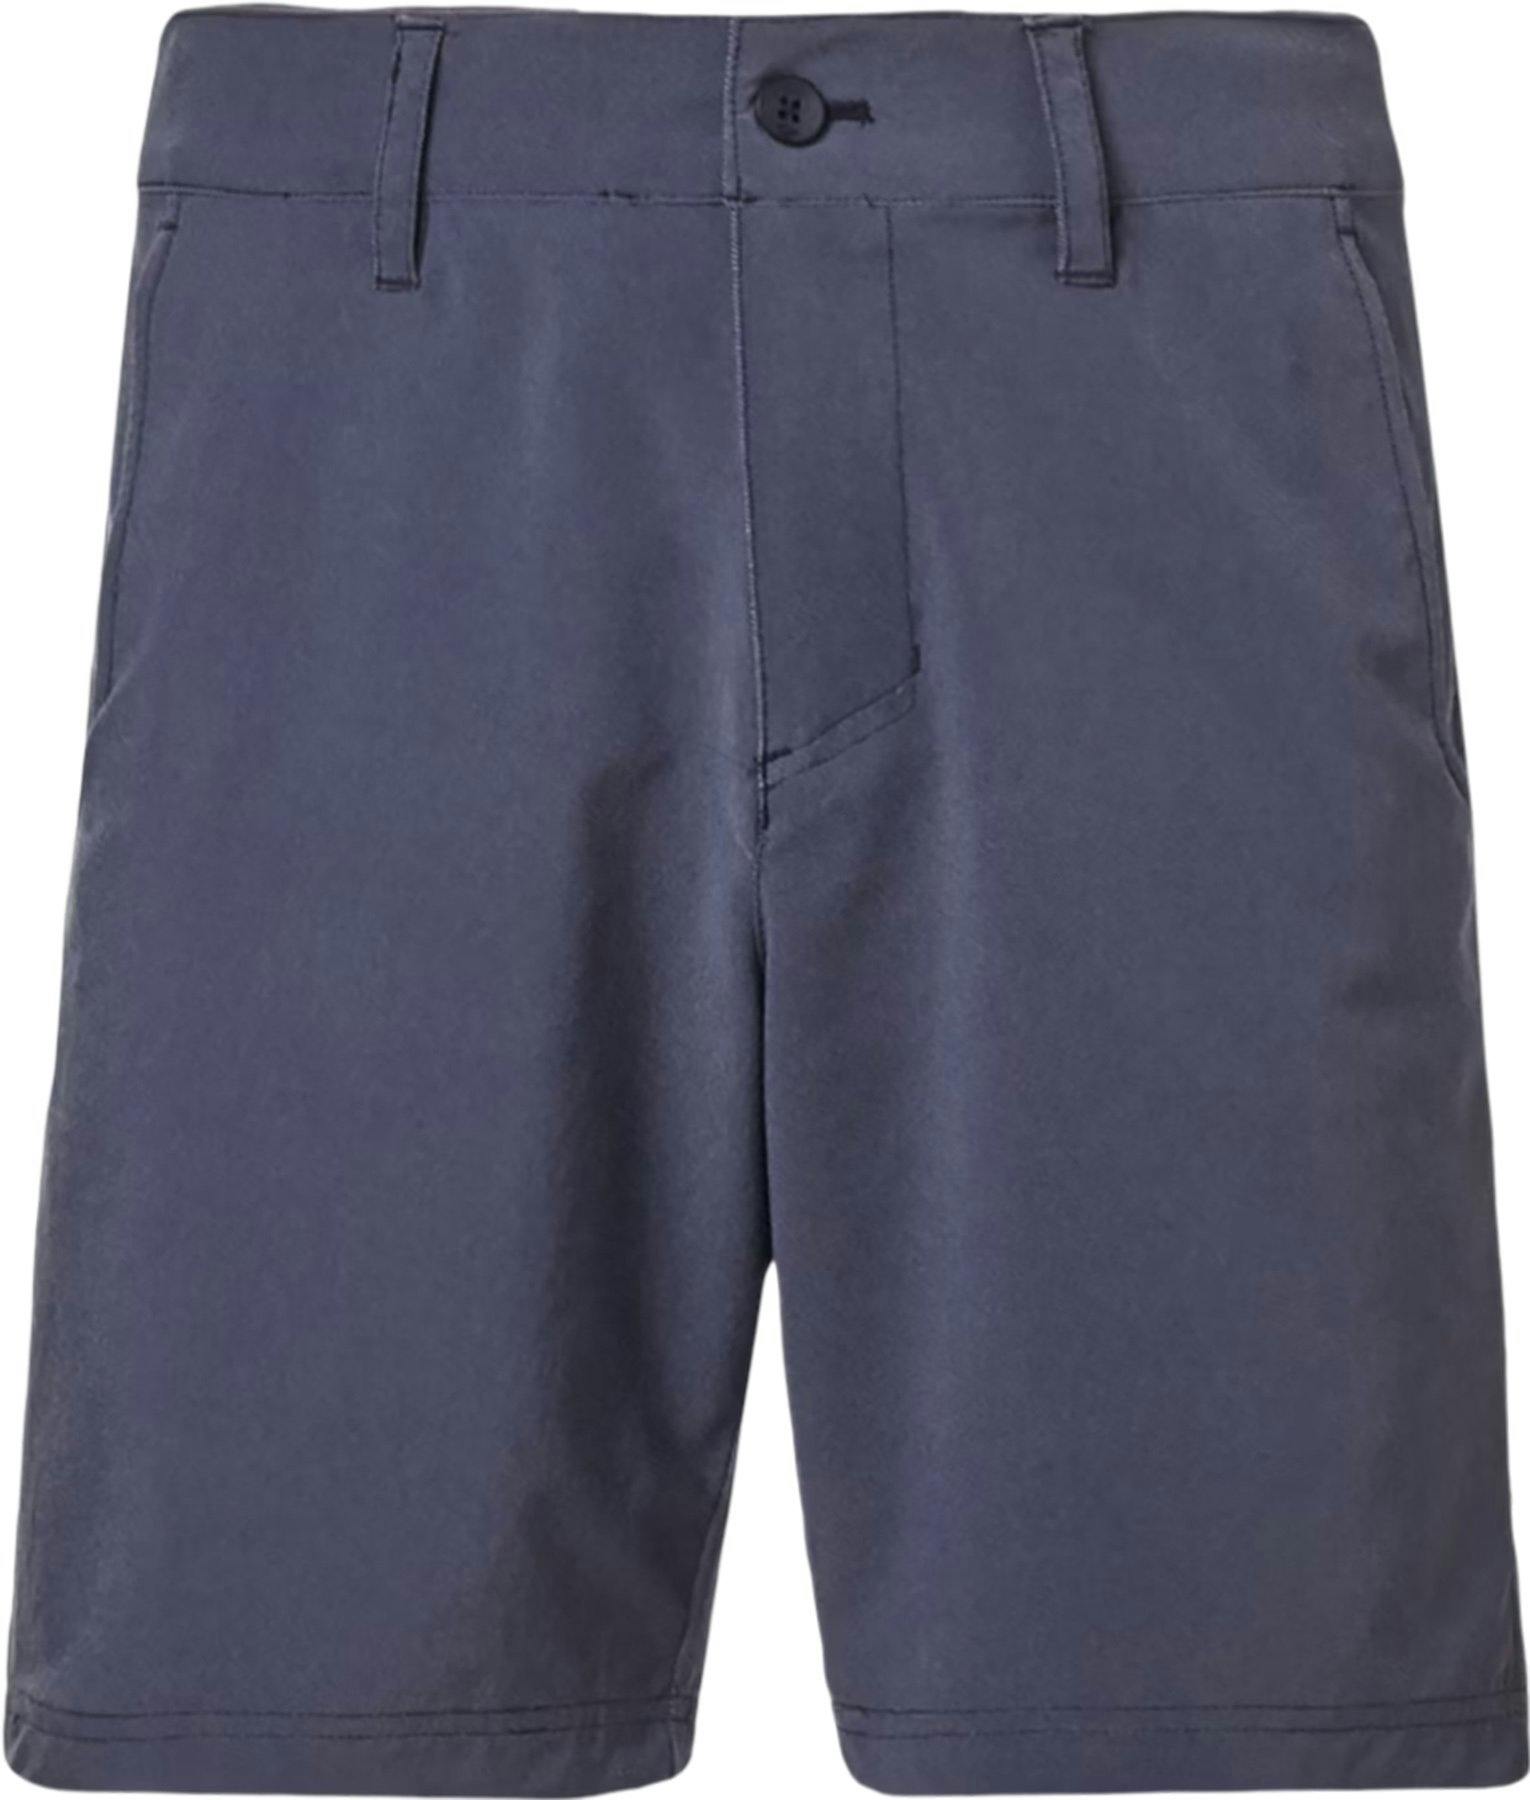 Product image for Pierside RC Hybrid Shorts 19" - Men's